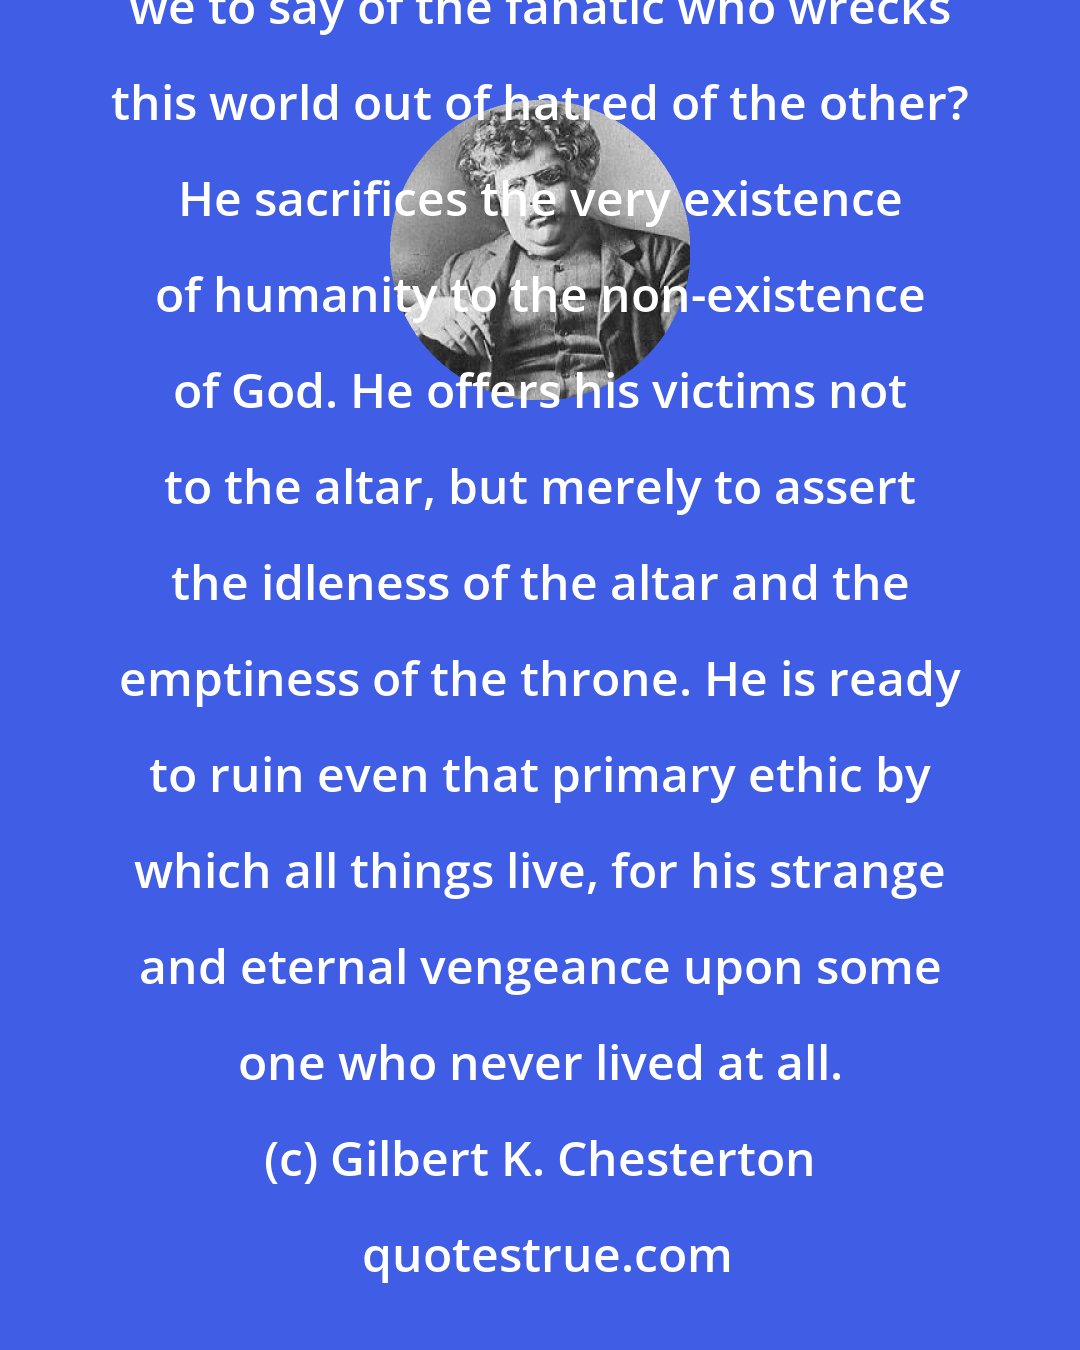 Gilbert K. Chesterton: We do not admire, we hardly excuse, the fanatic who wrecks this world for love of the other. But what are we to say of the fanatic who wrecks this world out of hatred of the other? He sacrifices the very existence of humanity to the non-existence of God. He offers his victims not to the altar, but merely to assert the idleness of the altar and the emptiness of the throne. He is ready to ruin even that primary ethic by which all things live, for his strange and eternal vengeance upon some one who never lived at all.